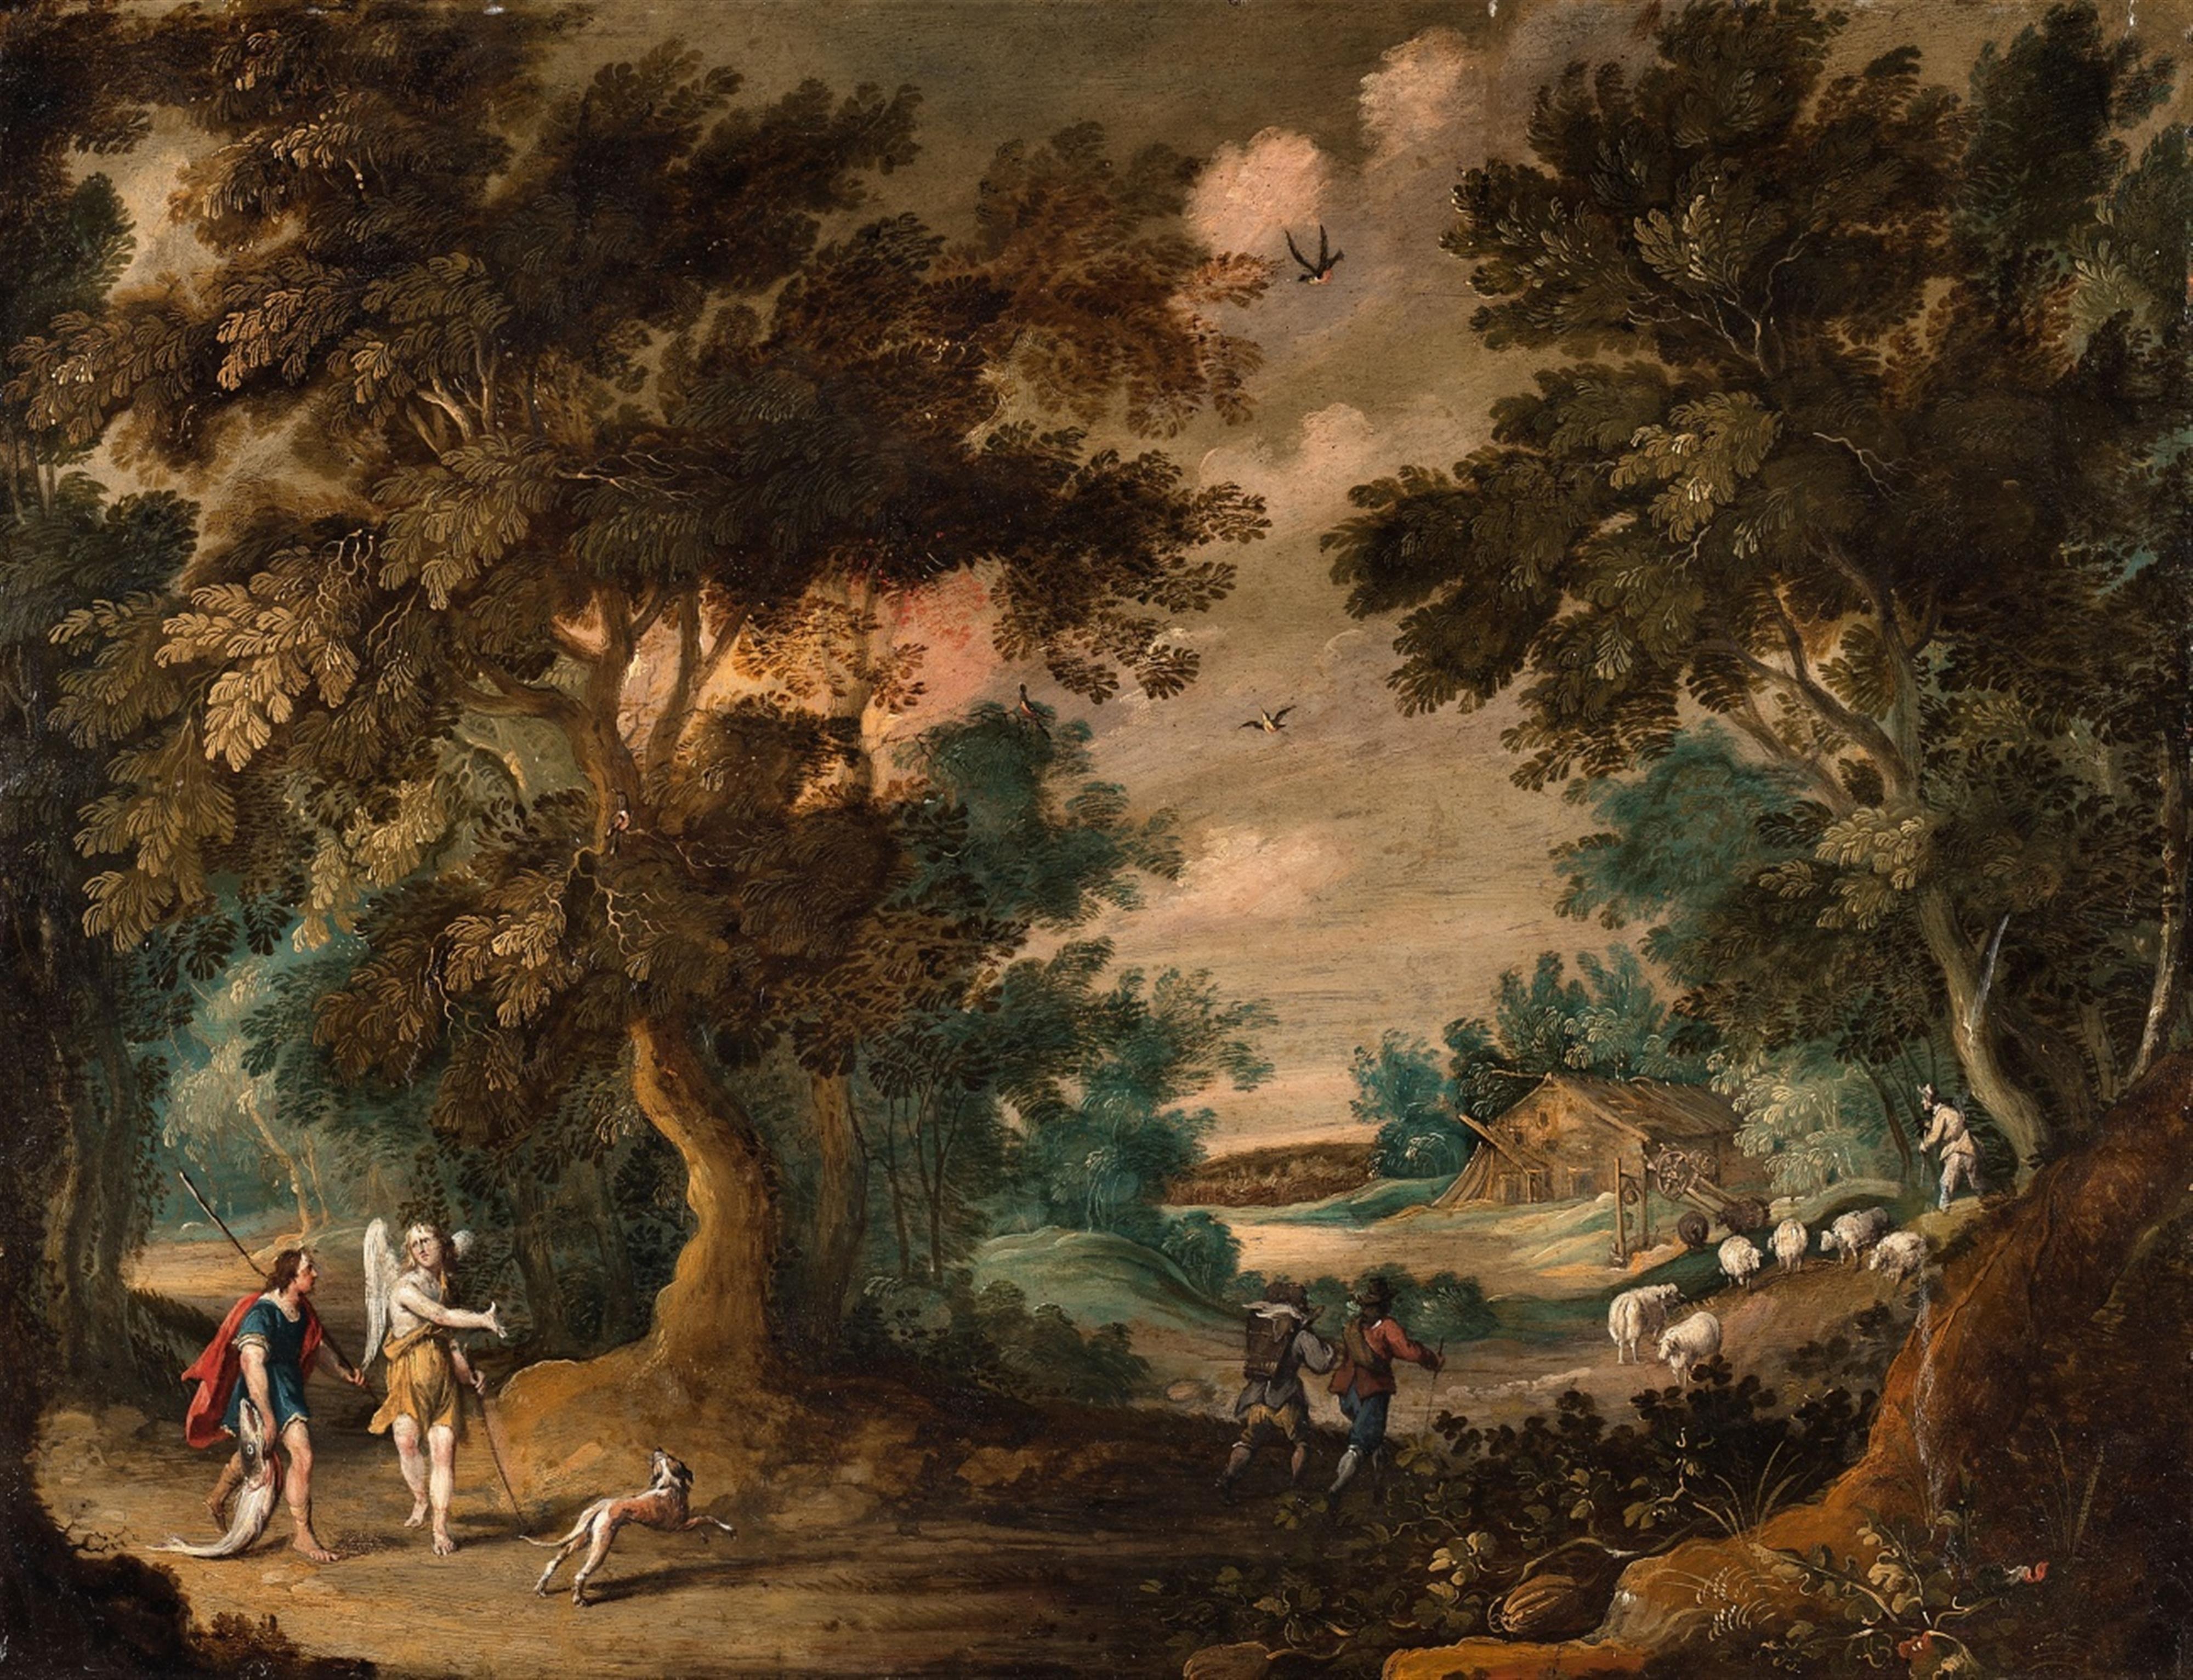 Flemish School 17th century - Tobias and the Angel in a Wooded Landscape The Penitent Mary Magdalene in a River Landscape - image-1